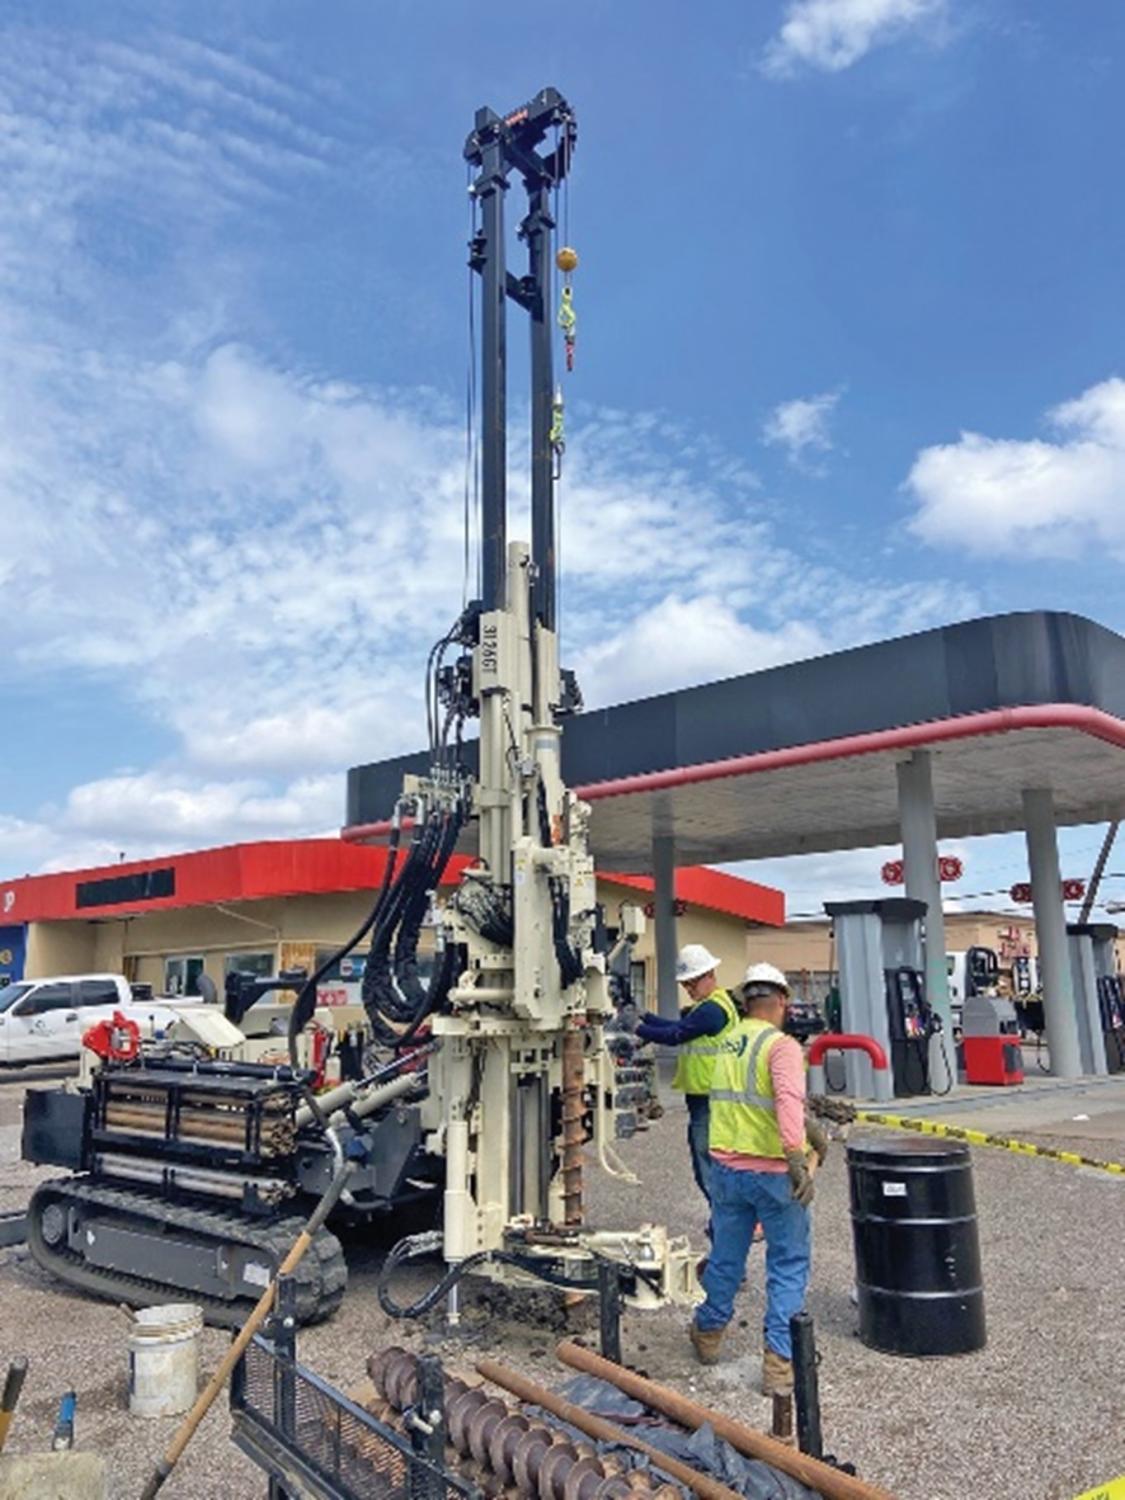 3126GT gets drillers into tighter areas than a bigger drill truck while providing power needed and reducing manhandling tooling or drilling components. 